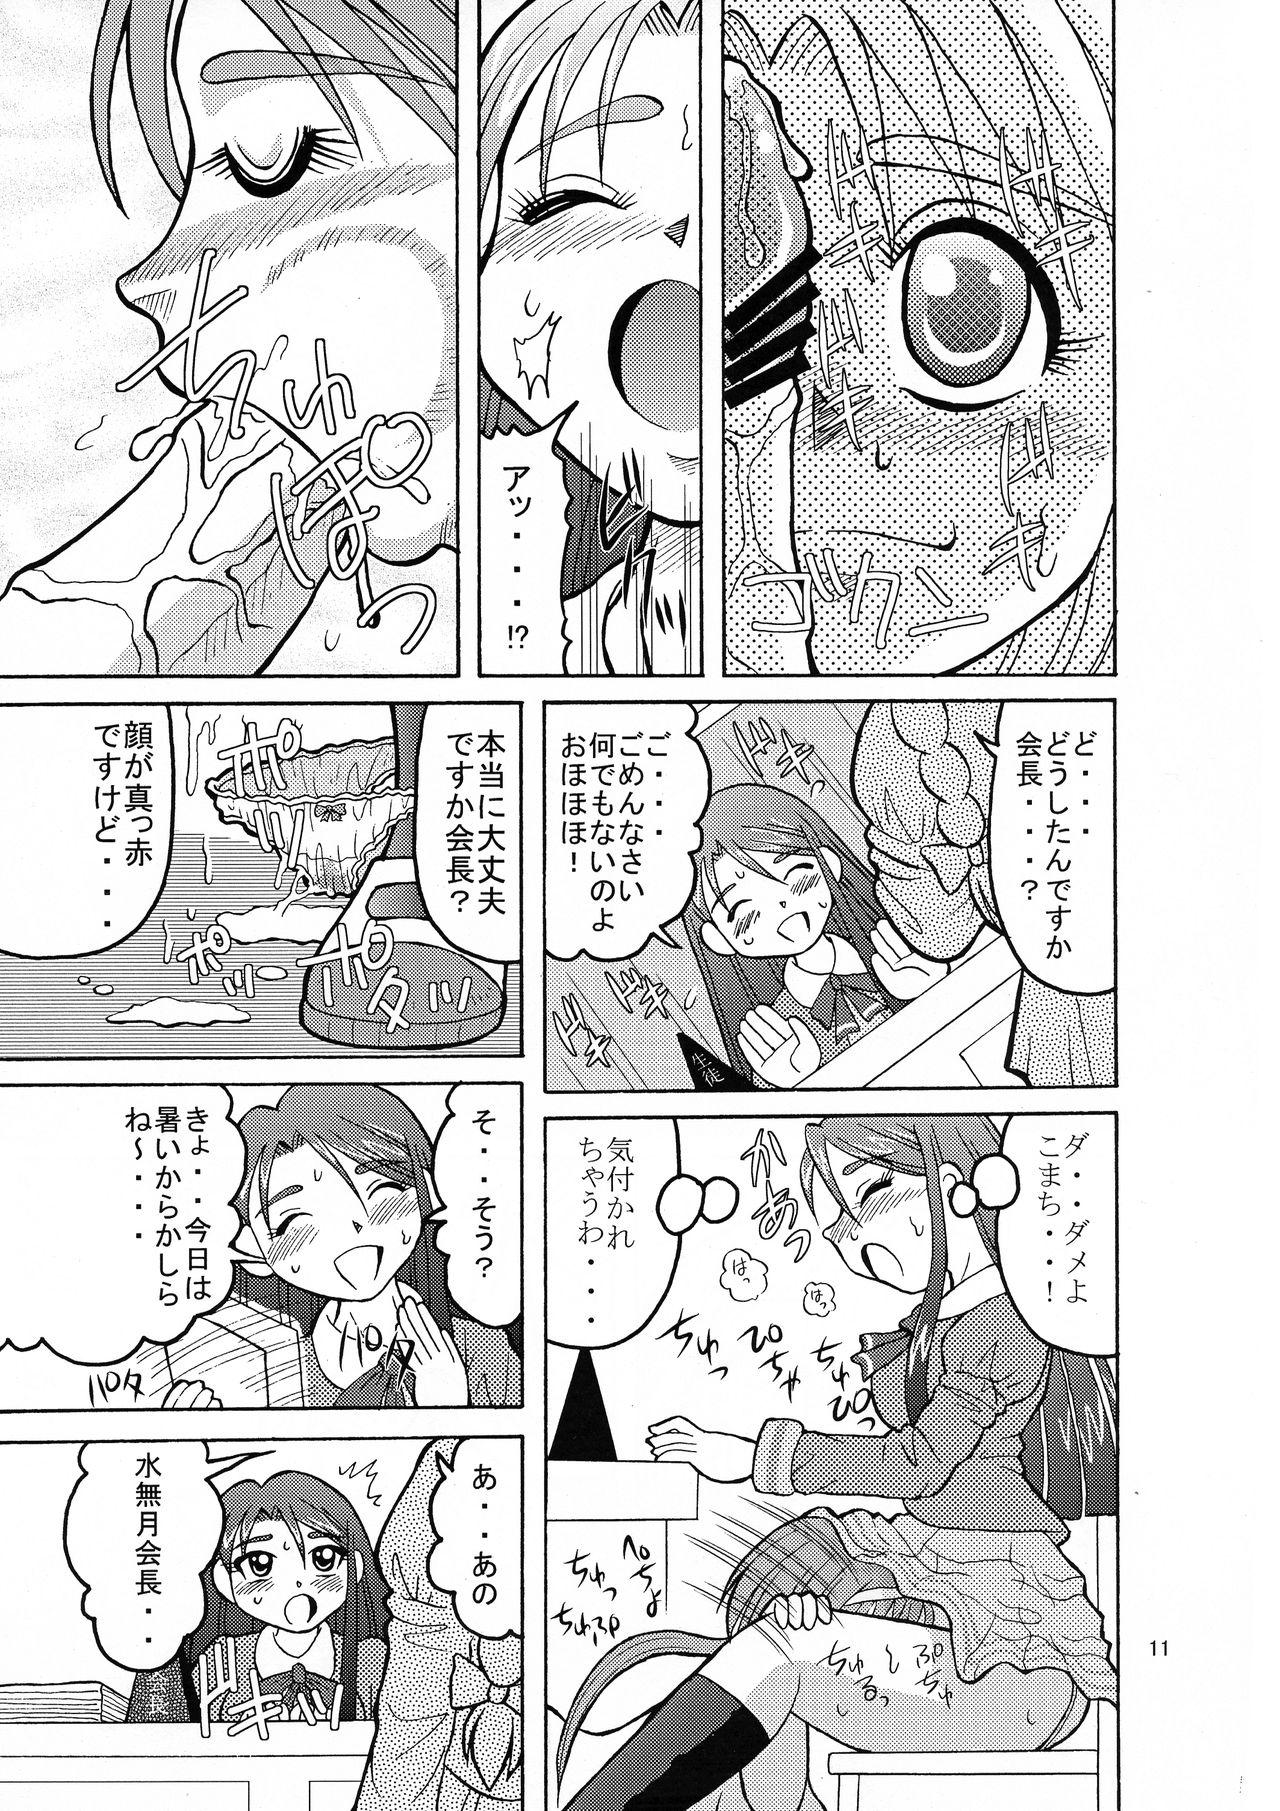 Best Blowjob Komakare GO! GO! - Yes precure 5 Bizarre - Page 11